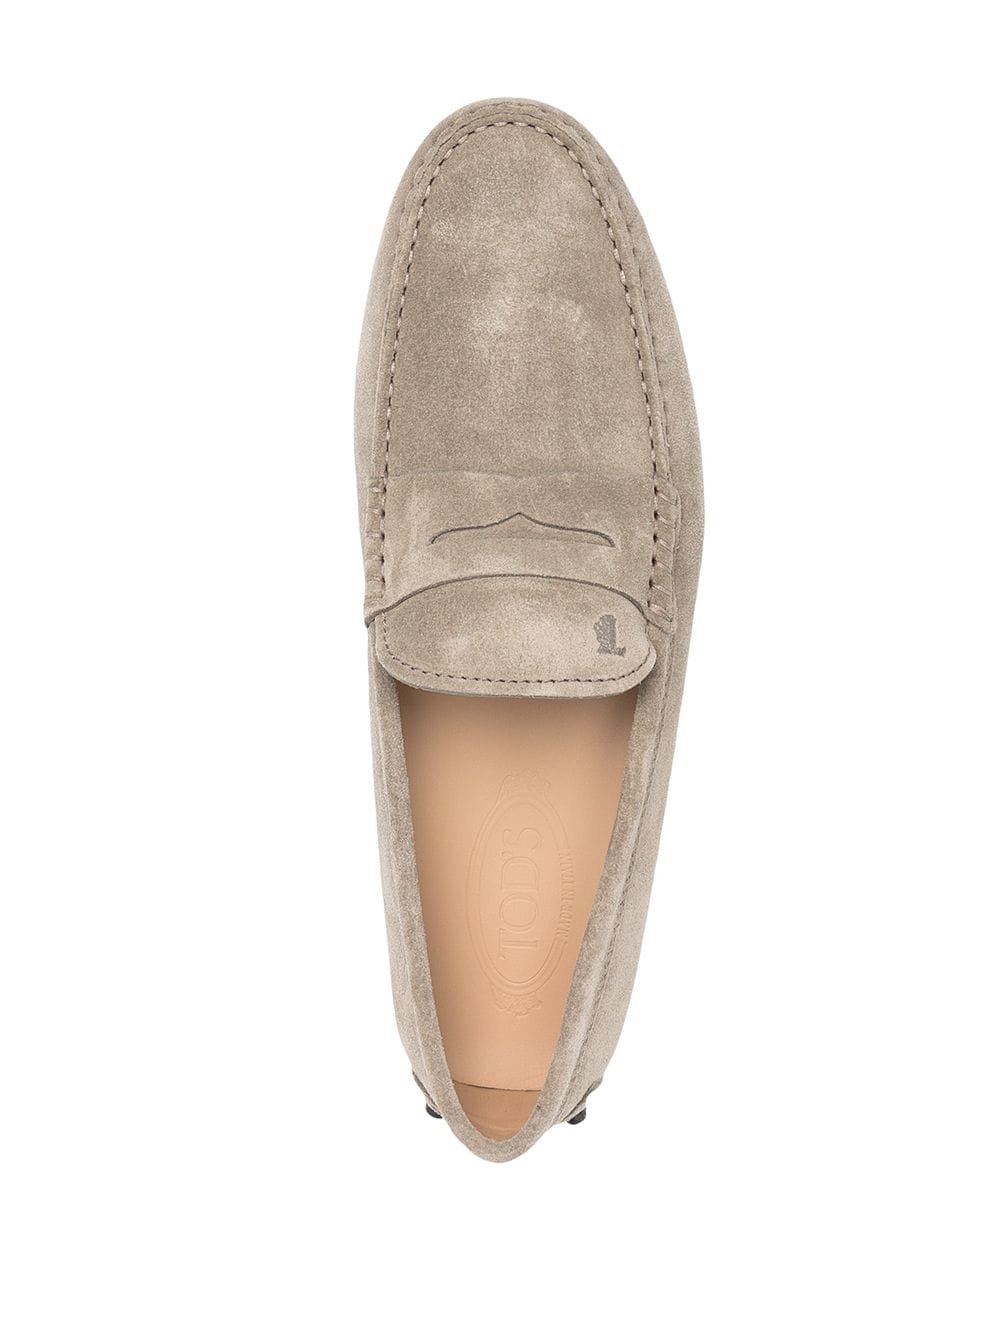 Tod's Flat Shoes Grey